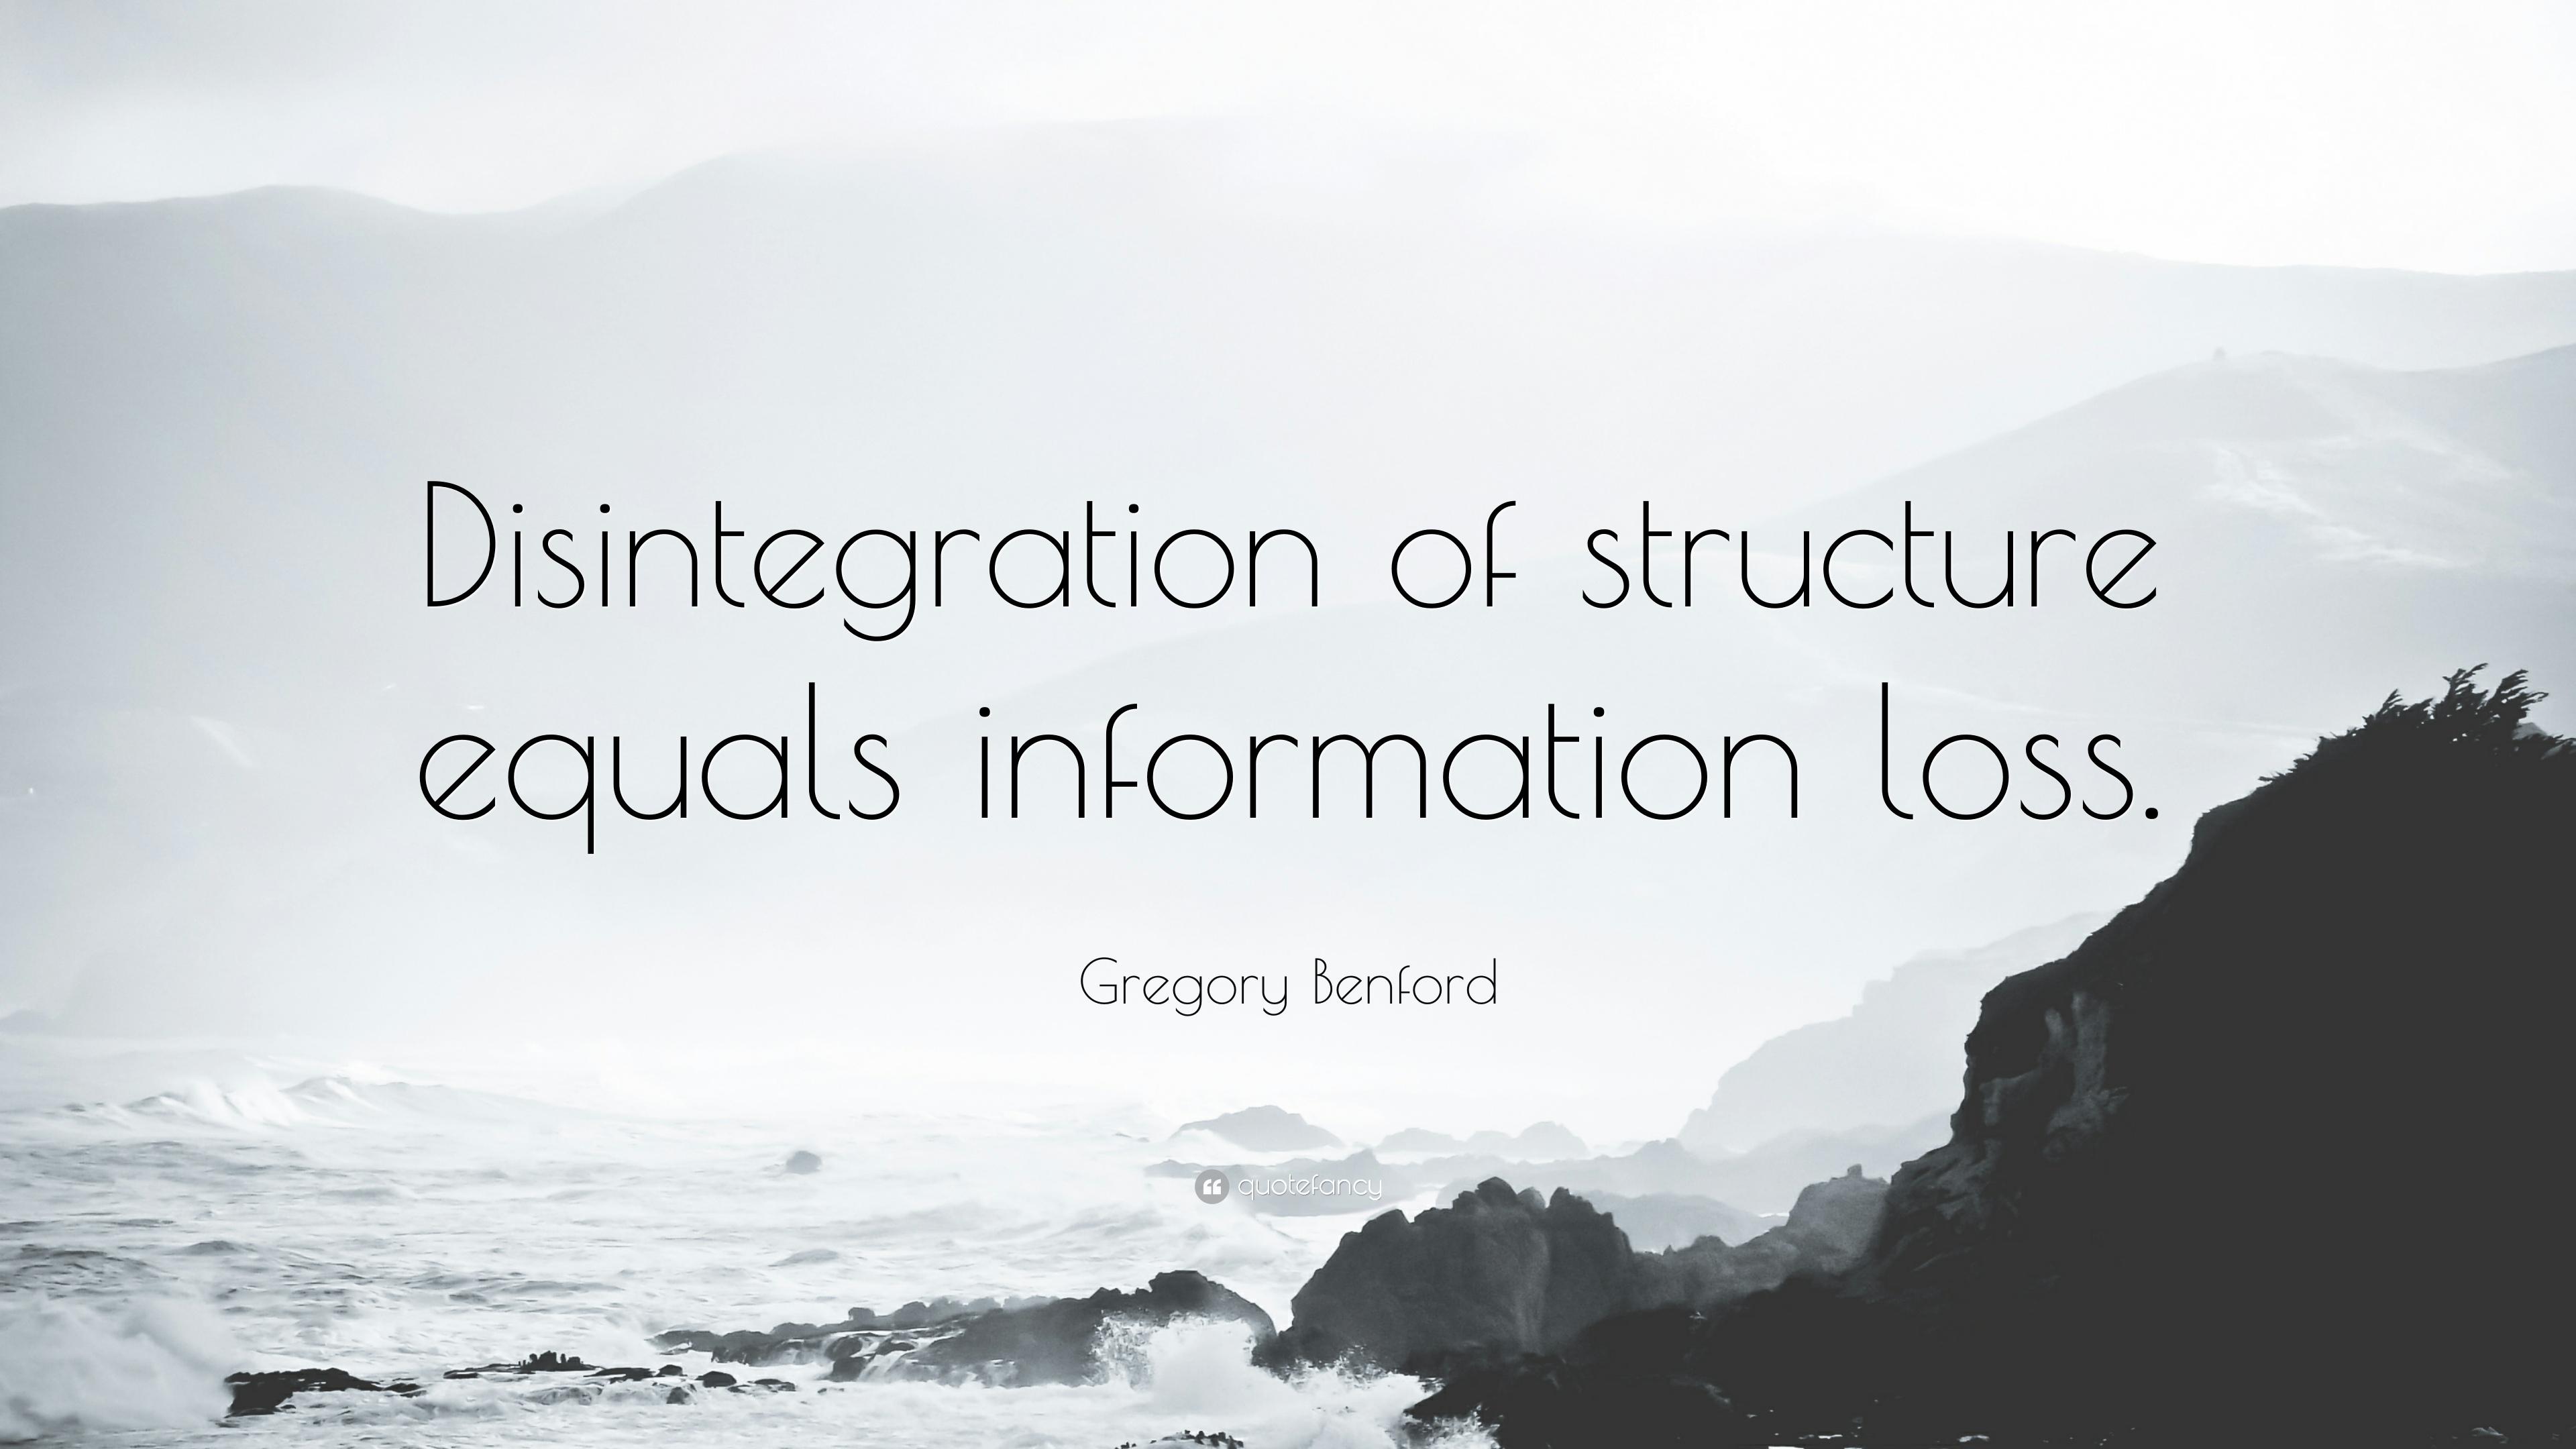 Gregory Benford Quote: “Disintegration of structure equals